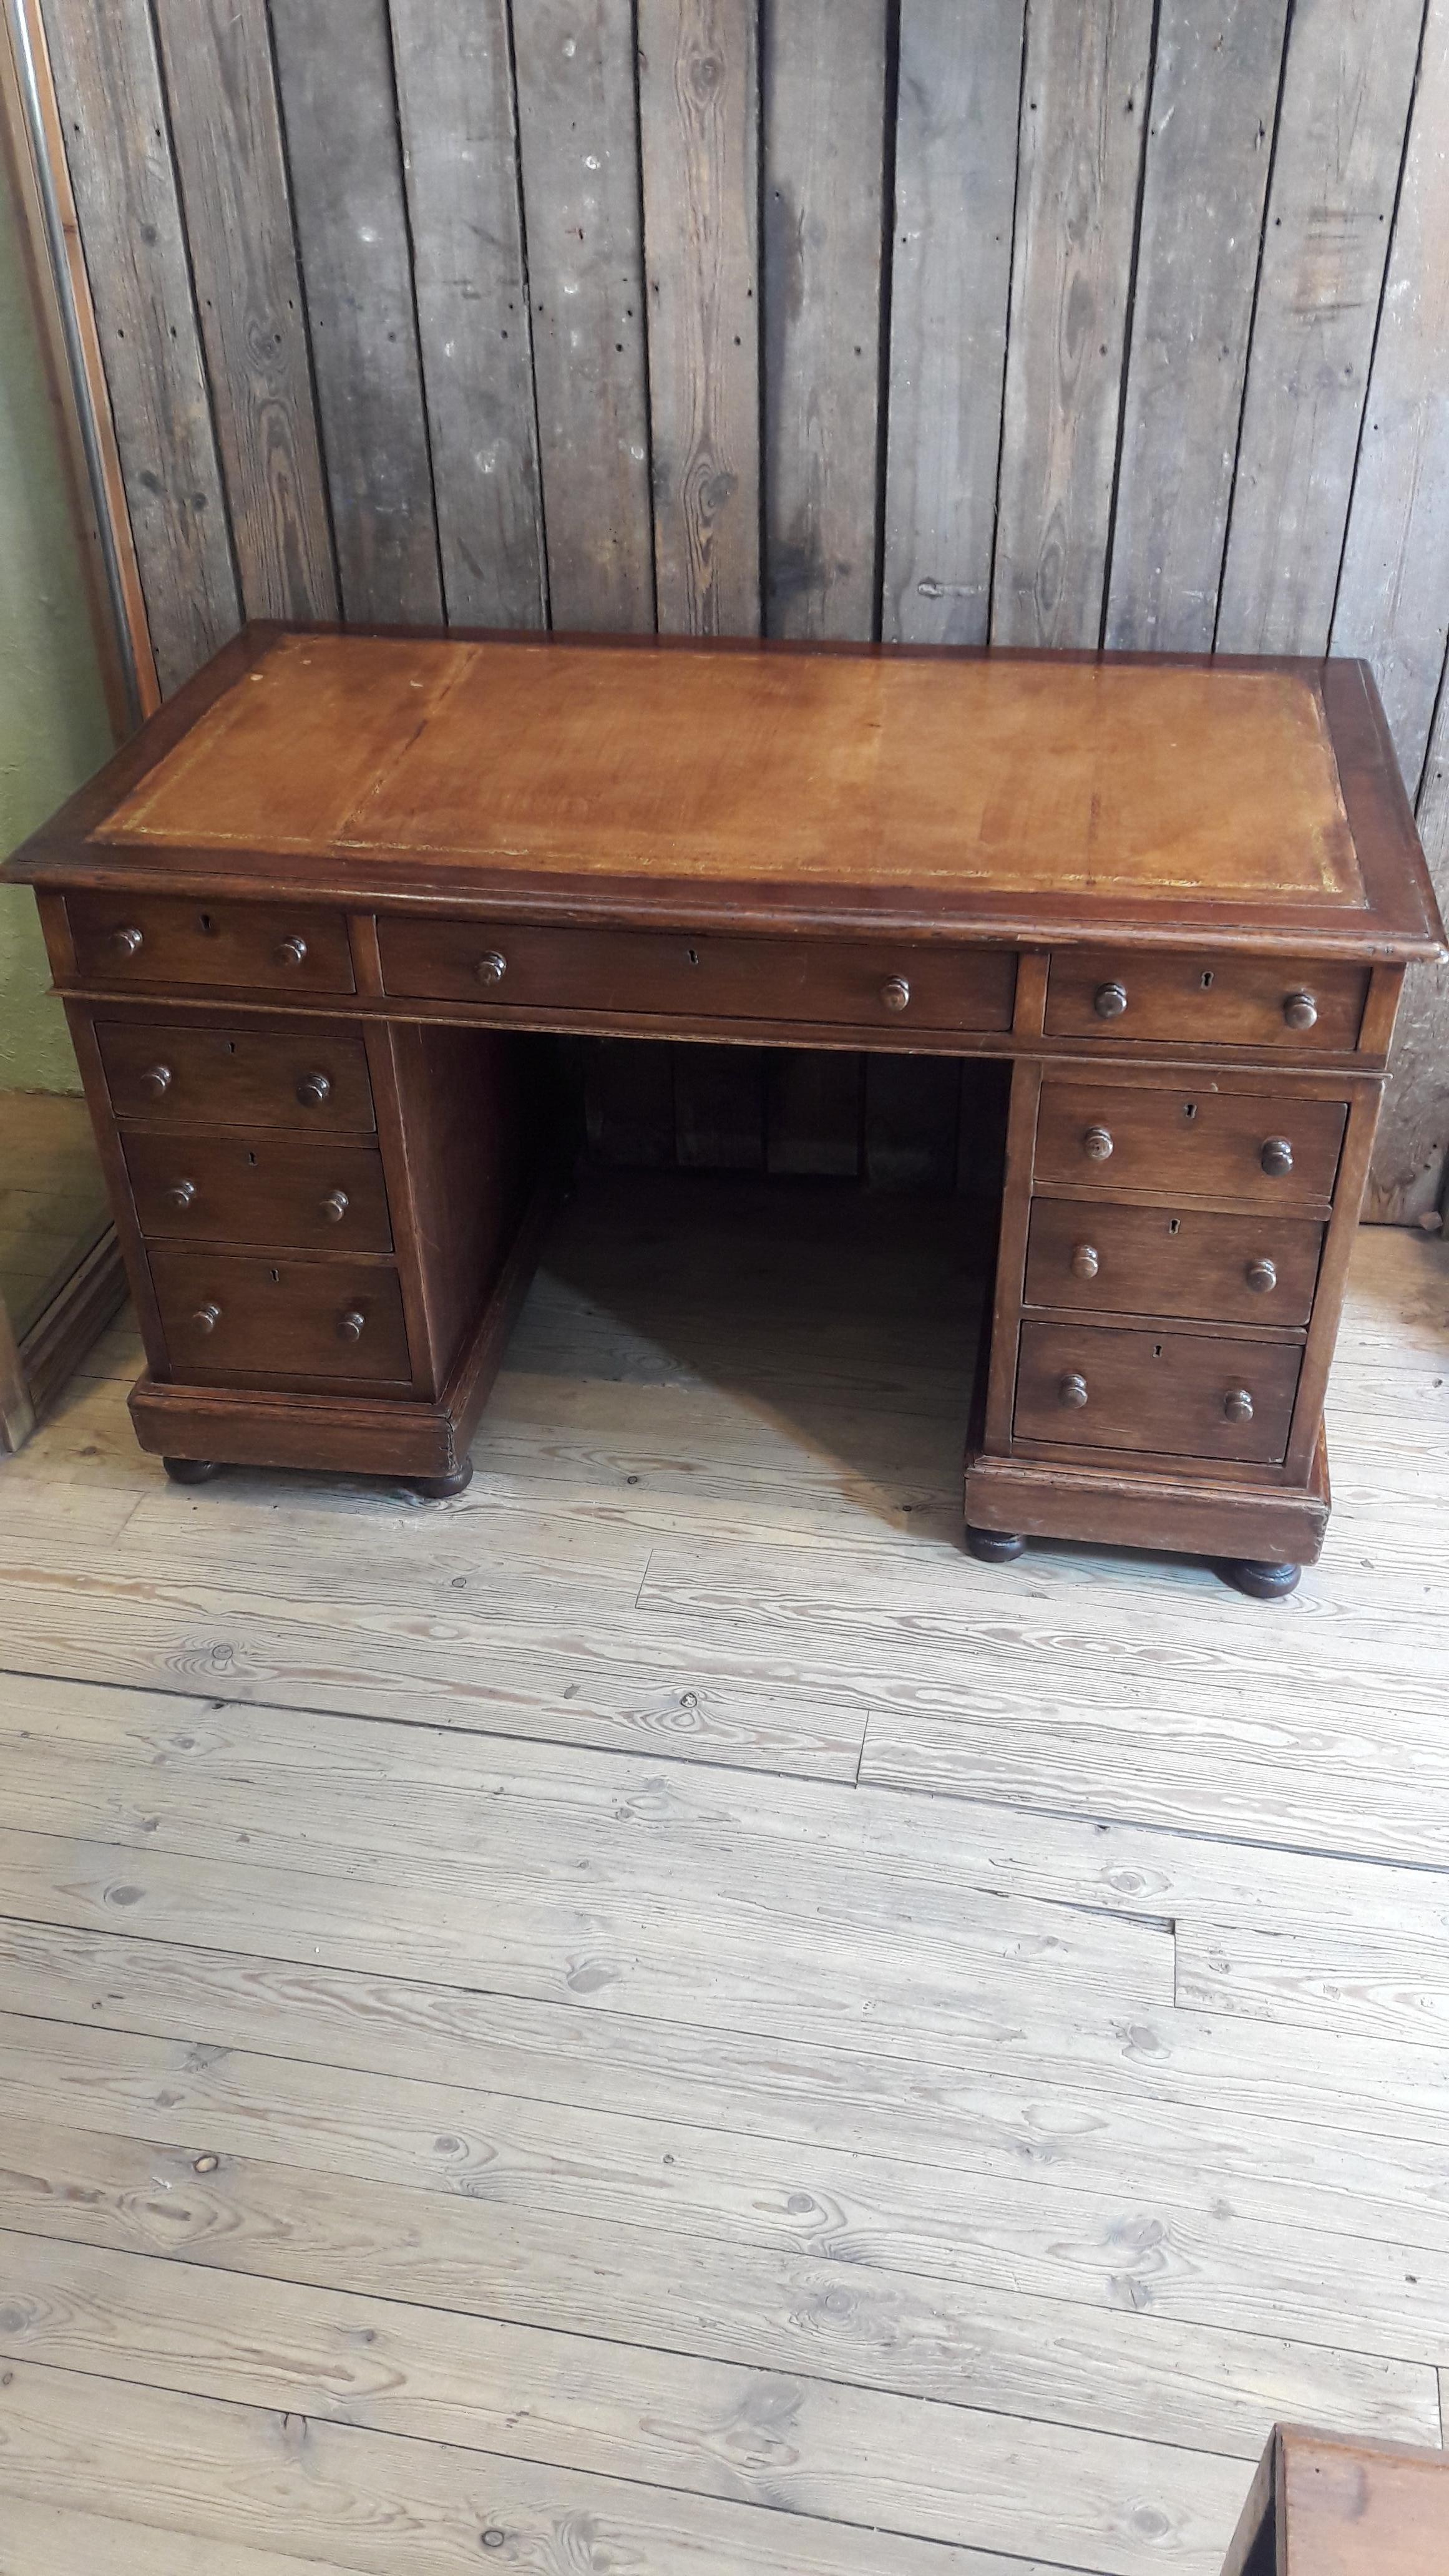 Classic late Victorian pedestal desk with new tan leather.
The desk is in three pieces, so very easy to move.